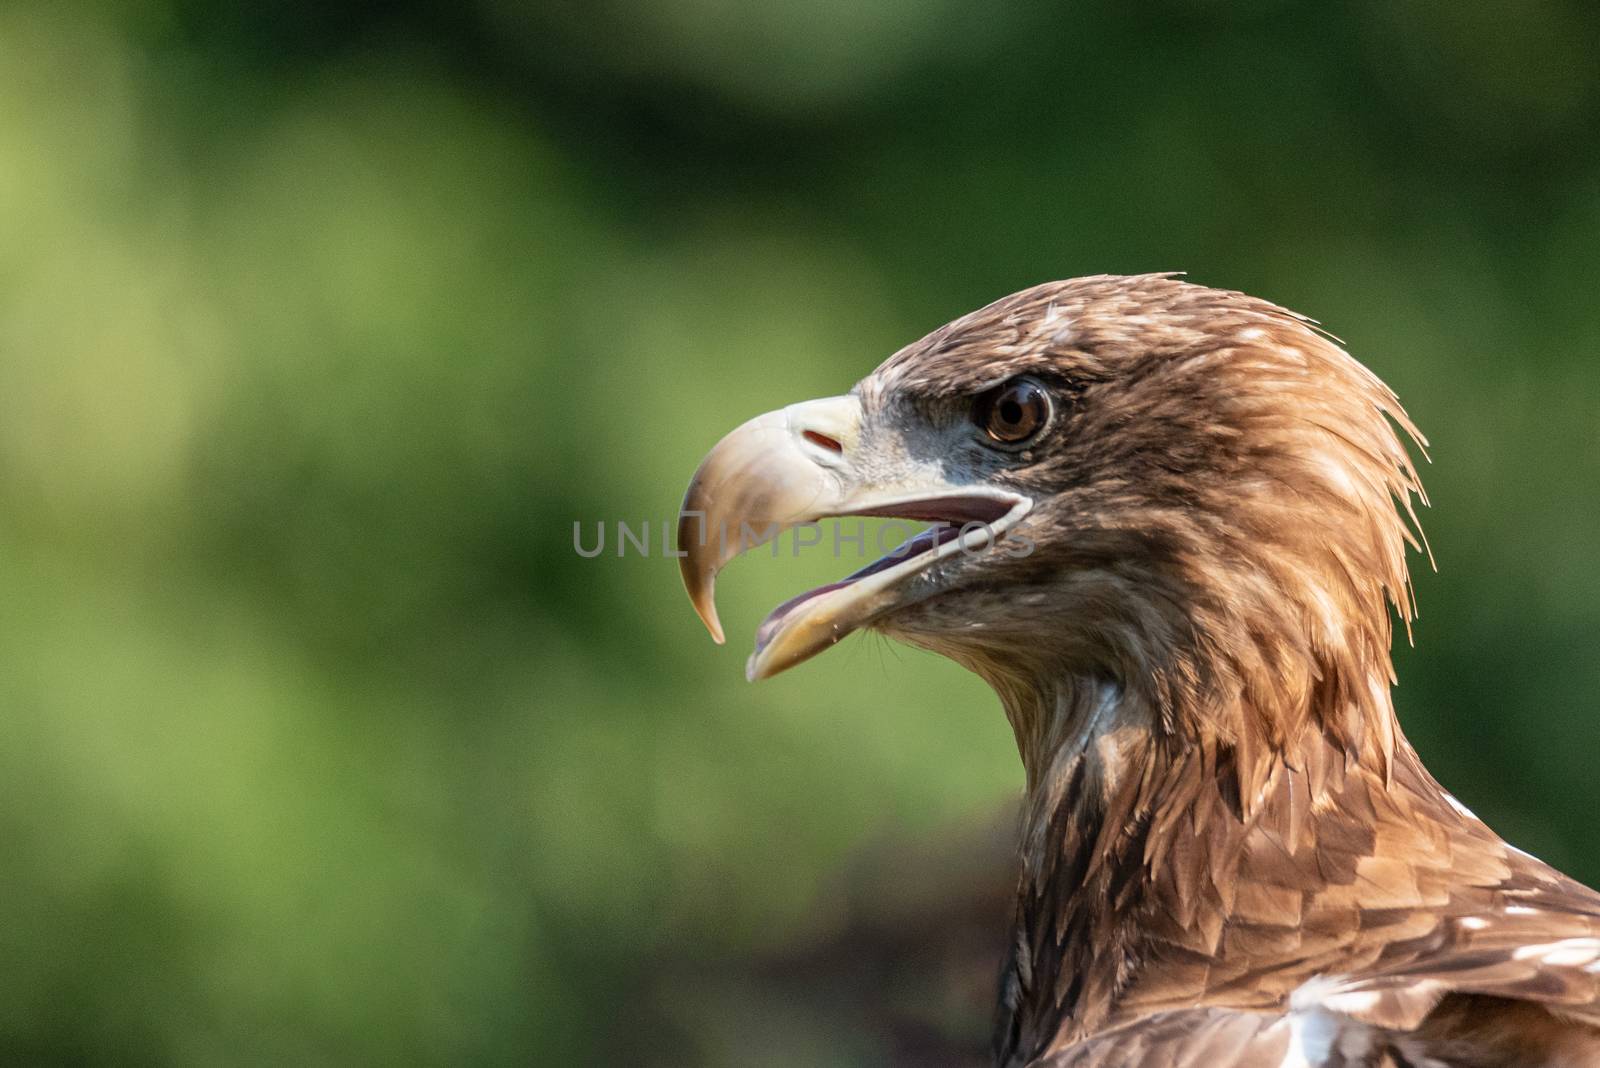 Close-up portrait of a golden eagle a large American bird by brambillasimone